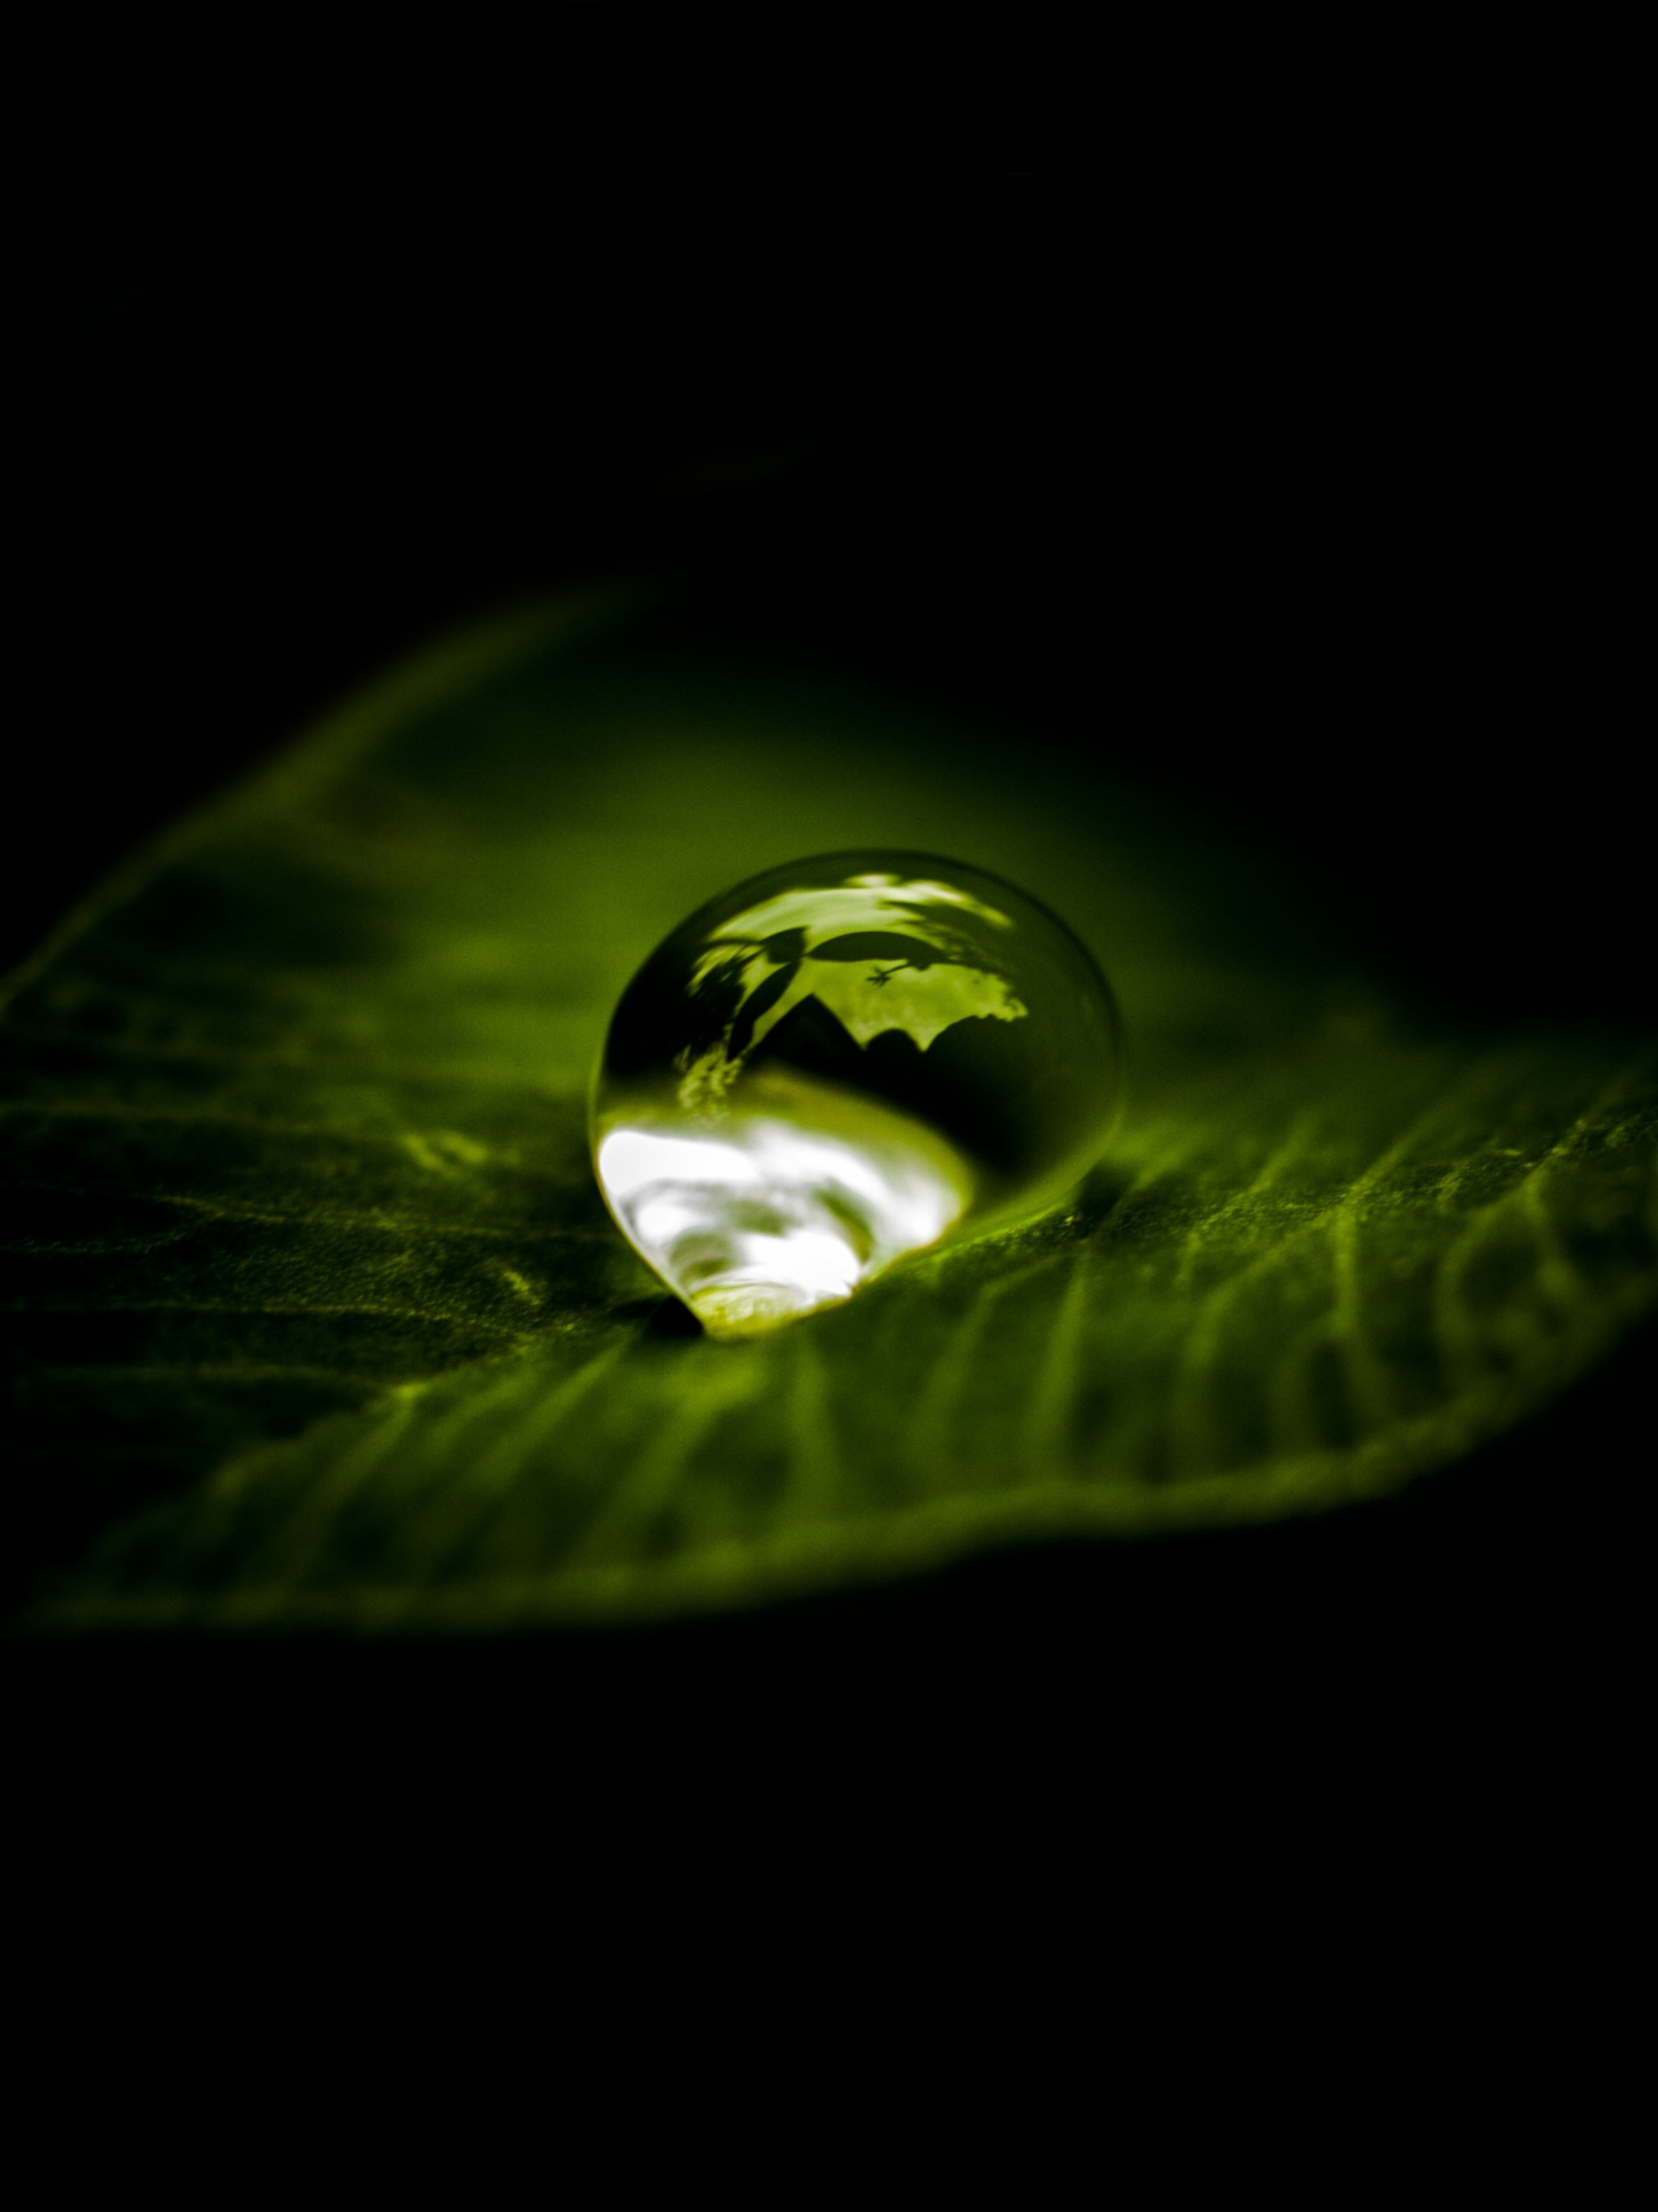 Waterdrop on Leaf Wallpaper - iPhone, Android & Desktop Backgrounds